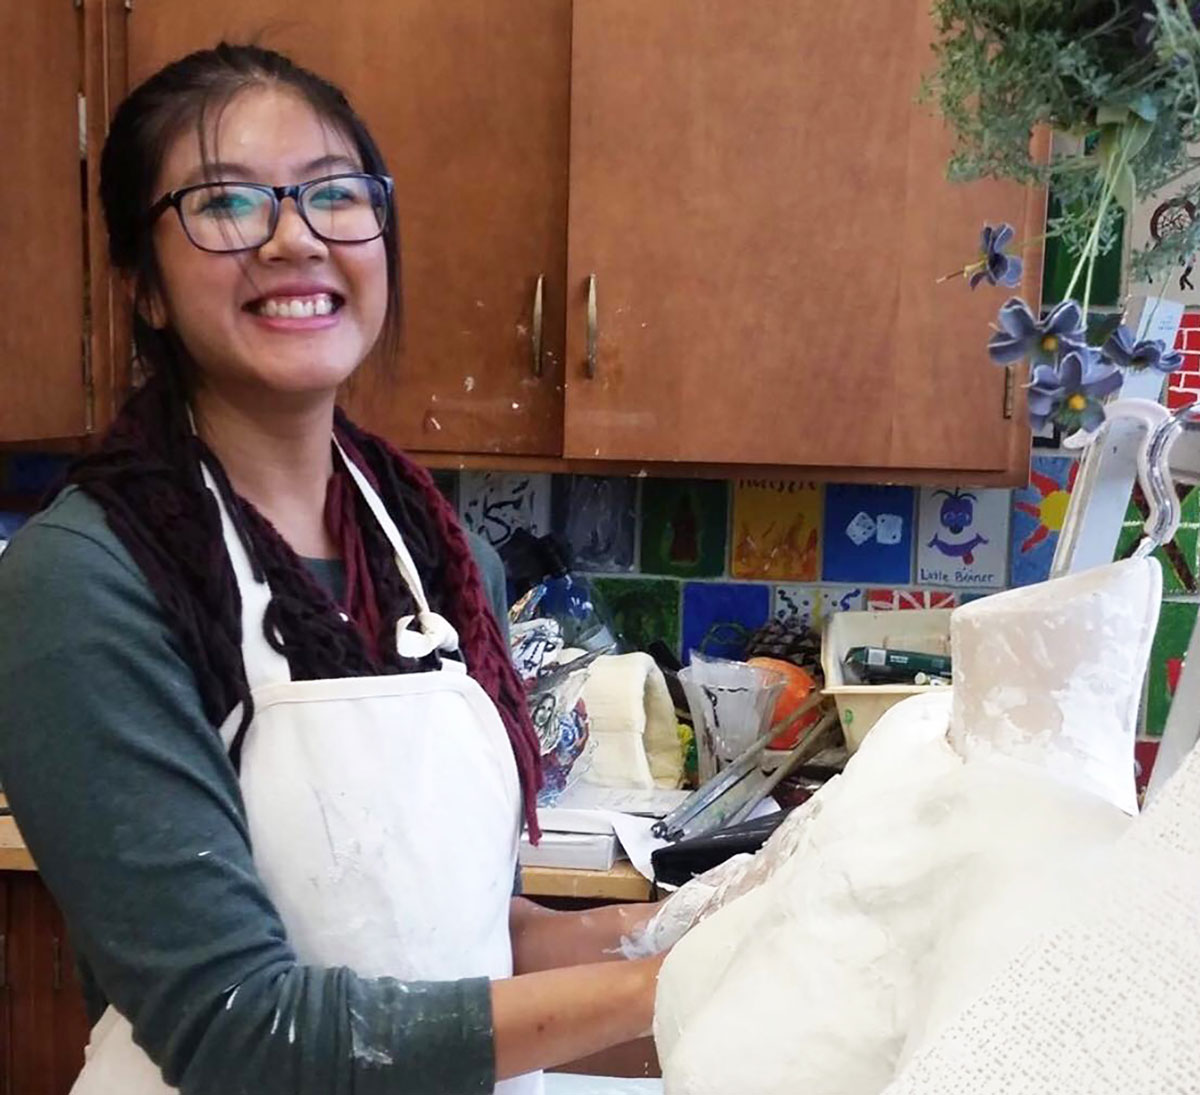 SMSU Senior Sureeporn Sompamitwong Makes a Difference With Creative Healing Space in Worthington